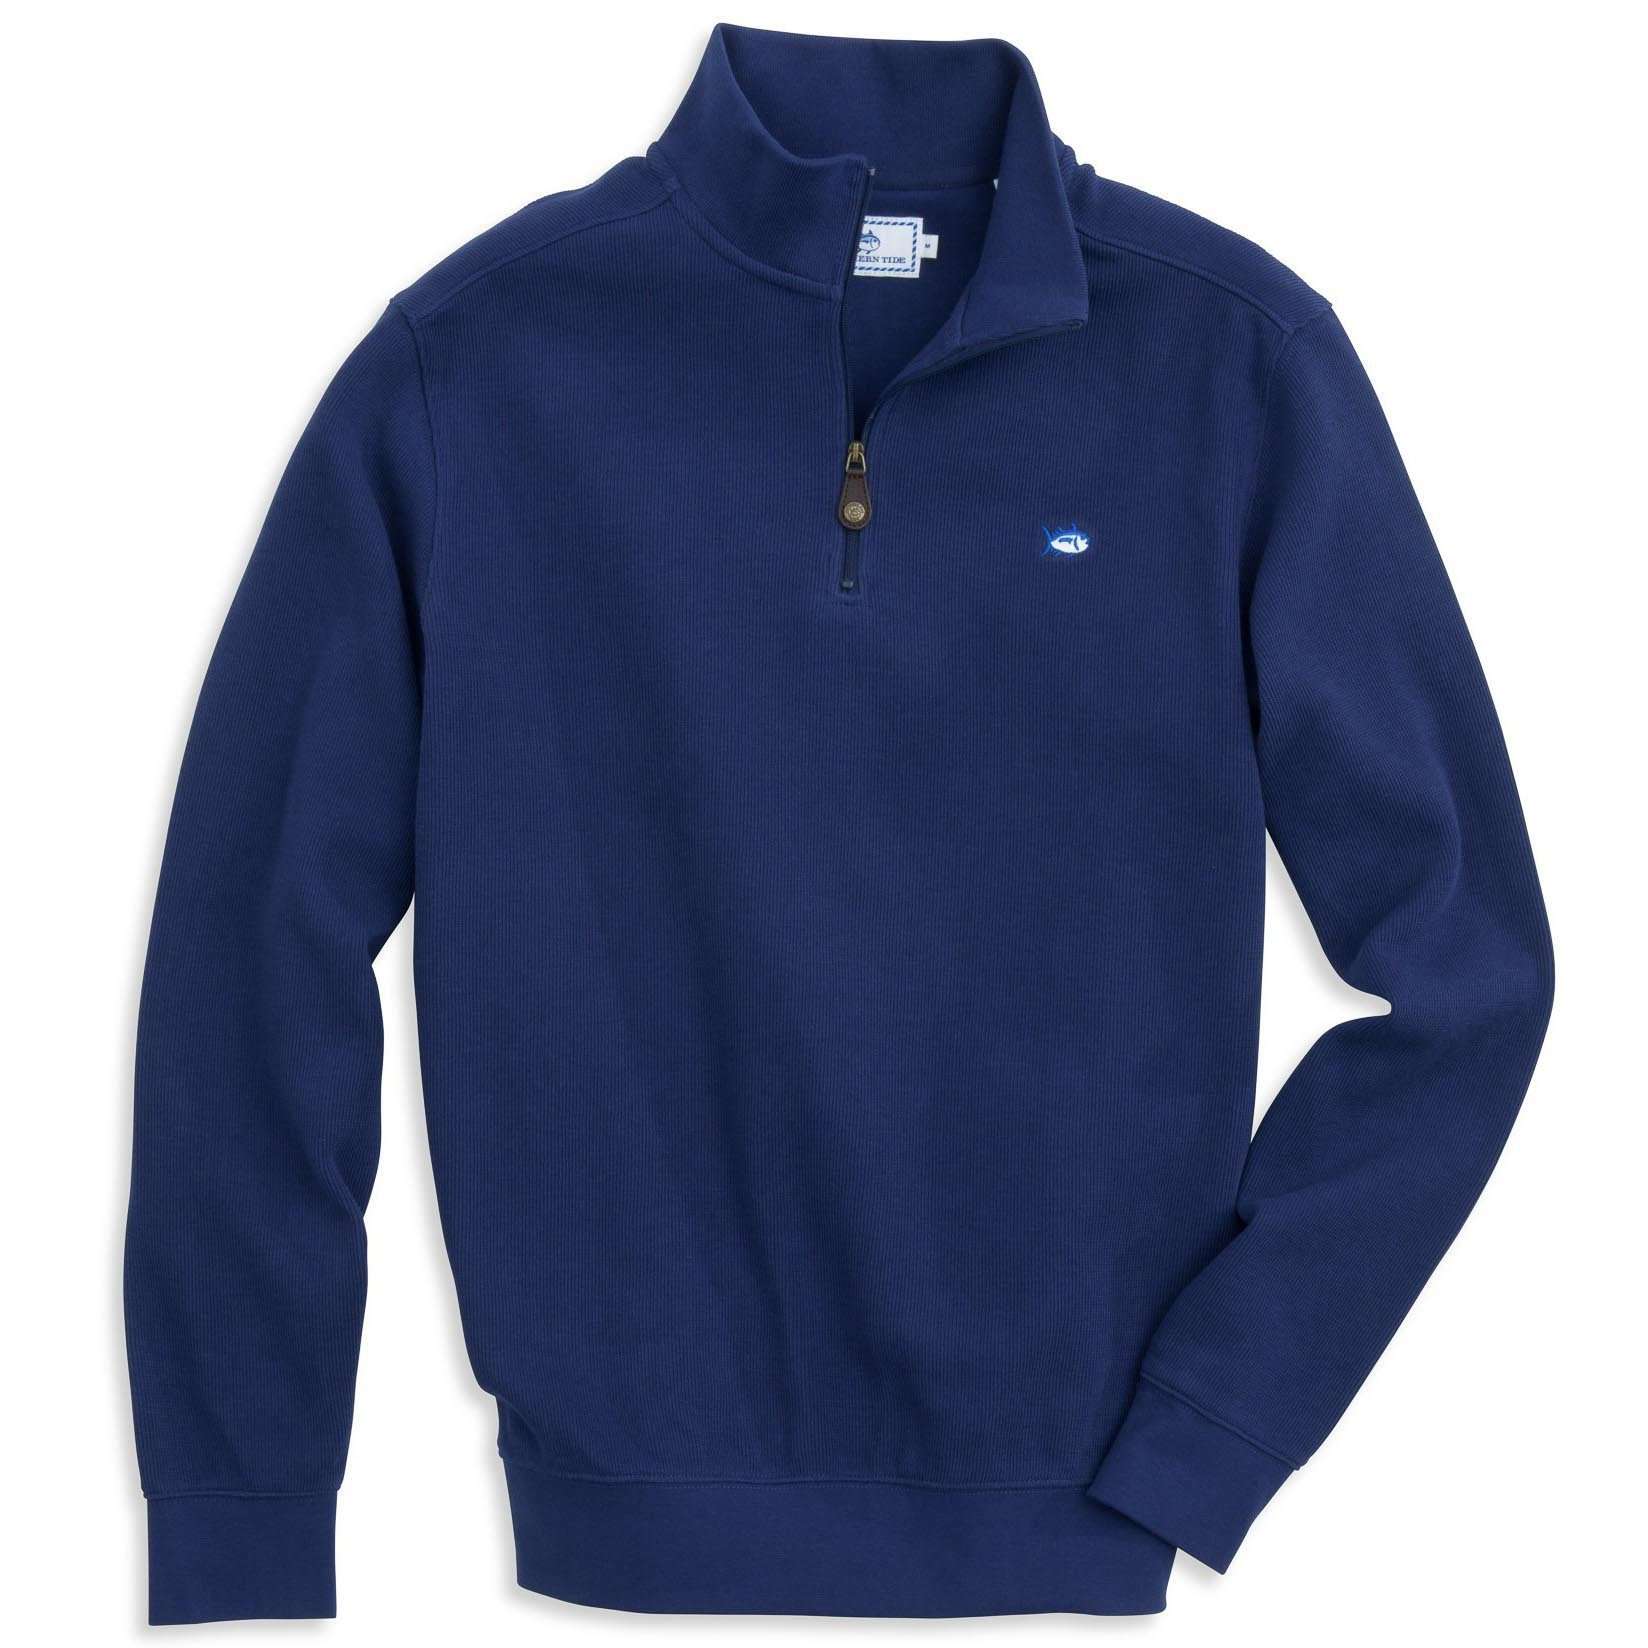 Skipjack 1/4 Zip Pullover in Blue Depths by Southern Tide - Country Club Prep